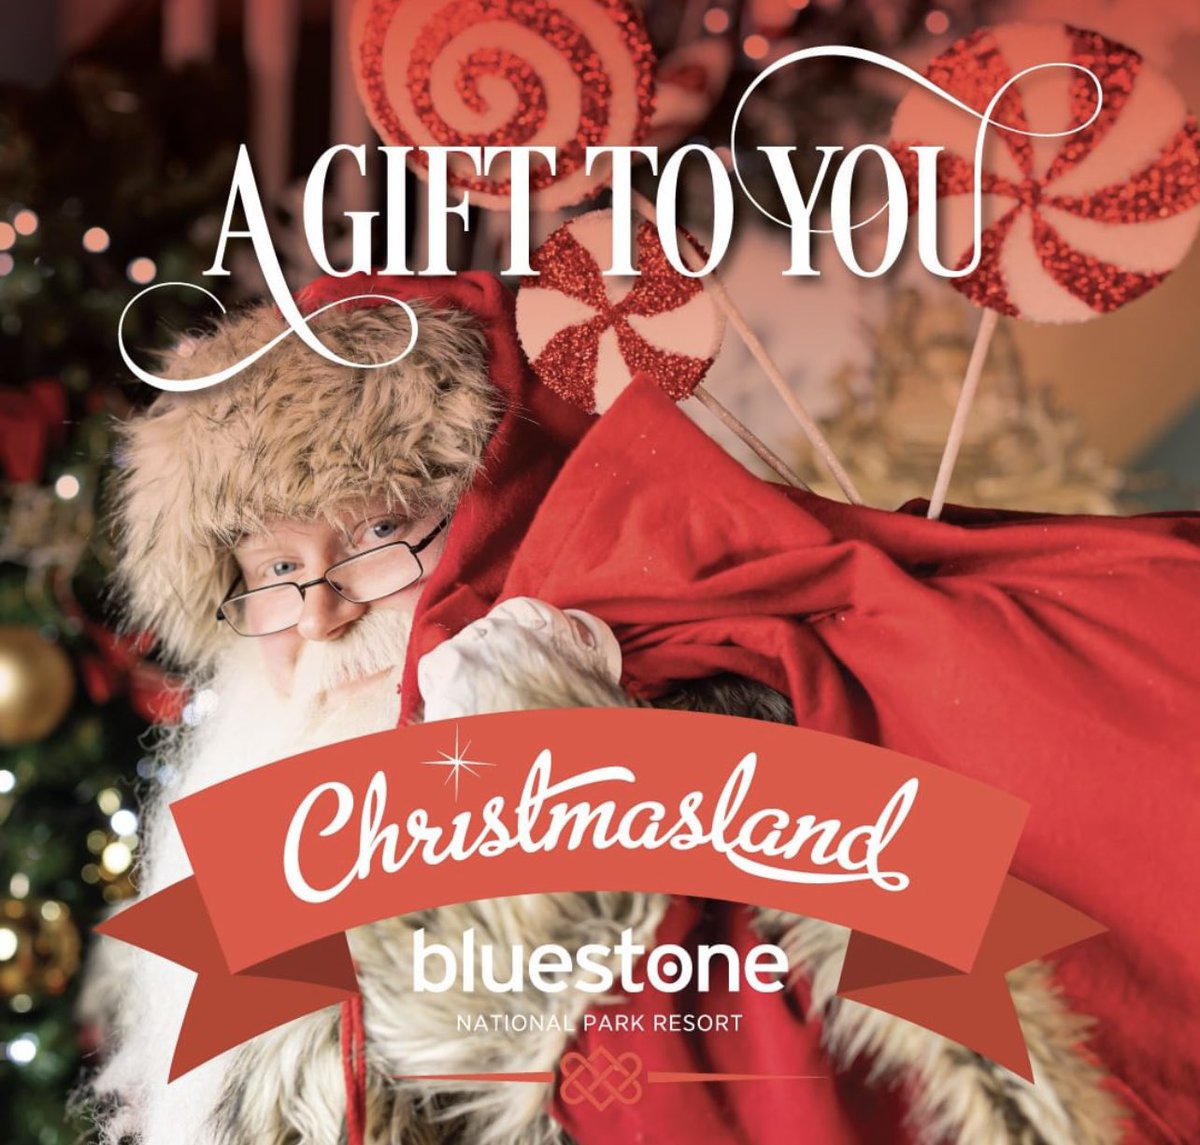 Book a magical Christmasland 2023 break and receive an exciting bundle of festive activities!* 🎁 Claus Christmas Show 🎁 Santa's VR Sleigh 🎁 Adrenaline Tokens 🎁 Santa's Workshop Book Now 👉 bit.ly/3KmdeUH Subject to availability *T&C's Apply.